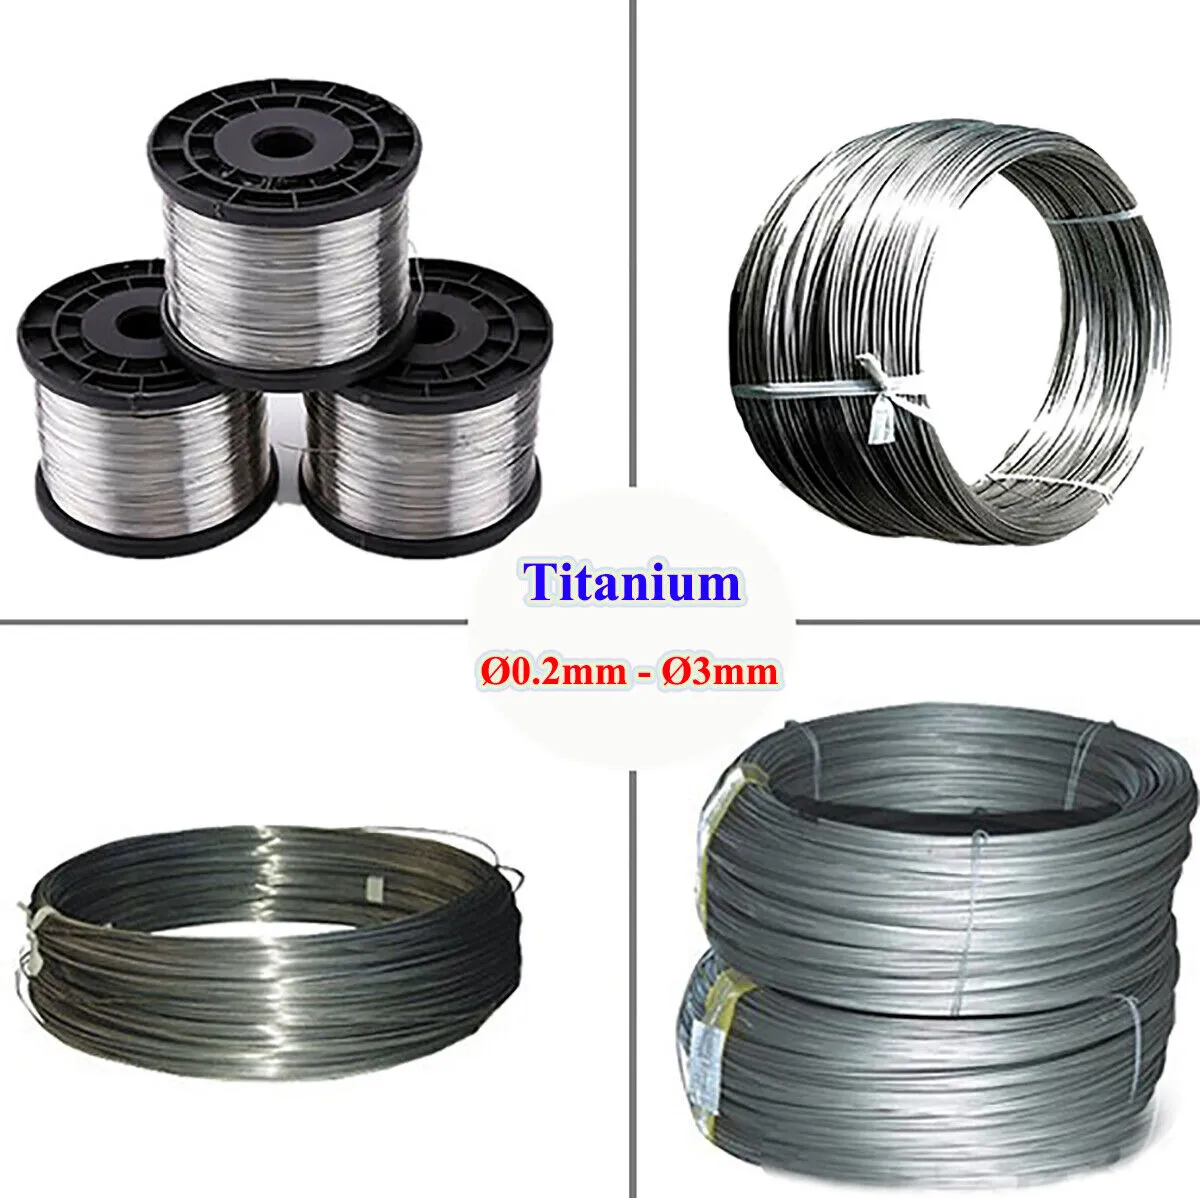 Trusted Titanium Wire Supplier and Manufacturer